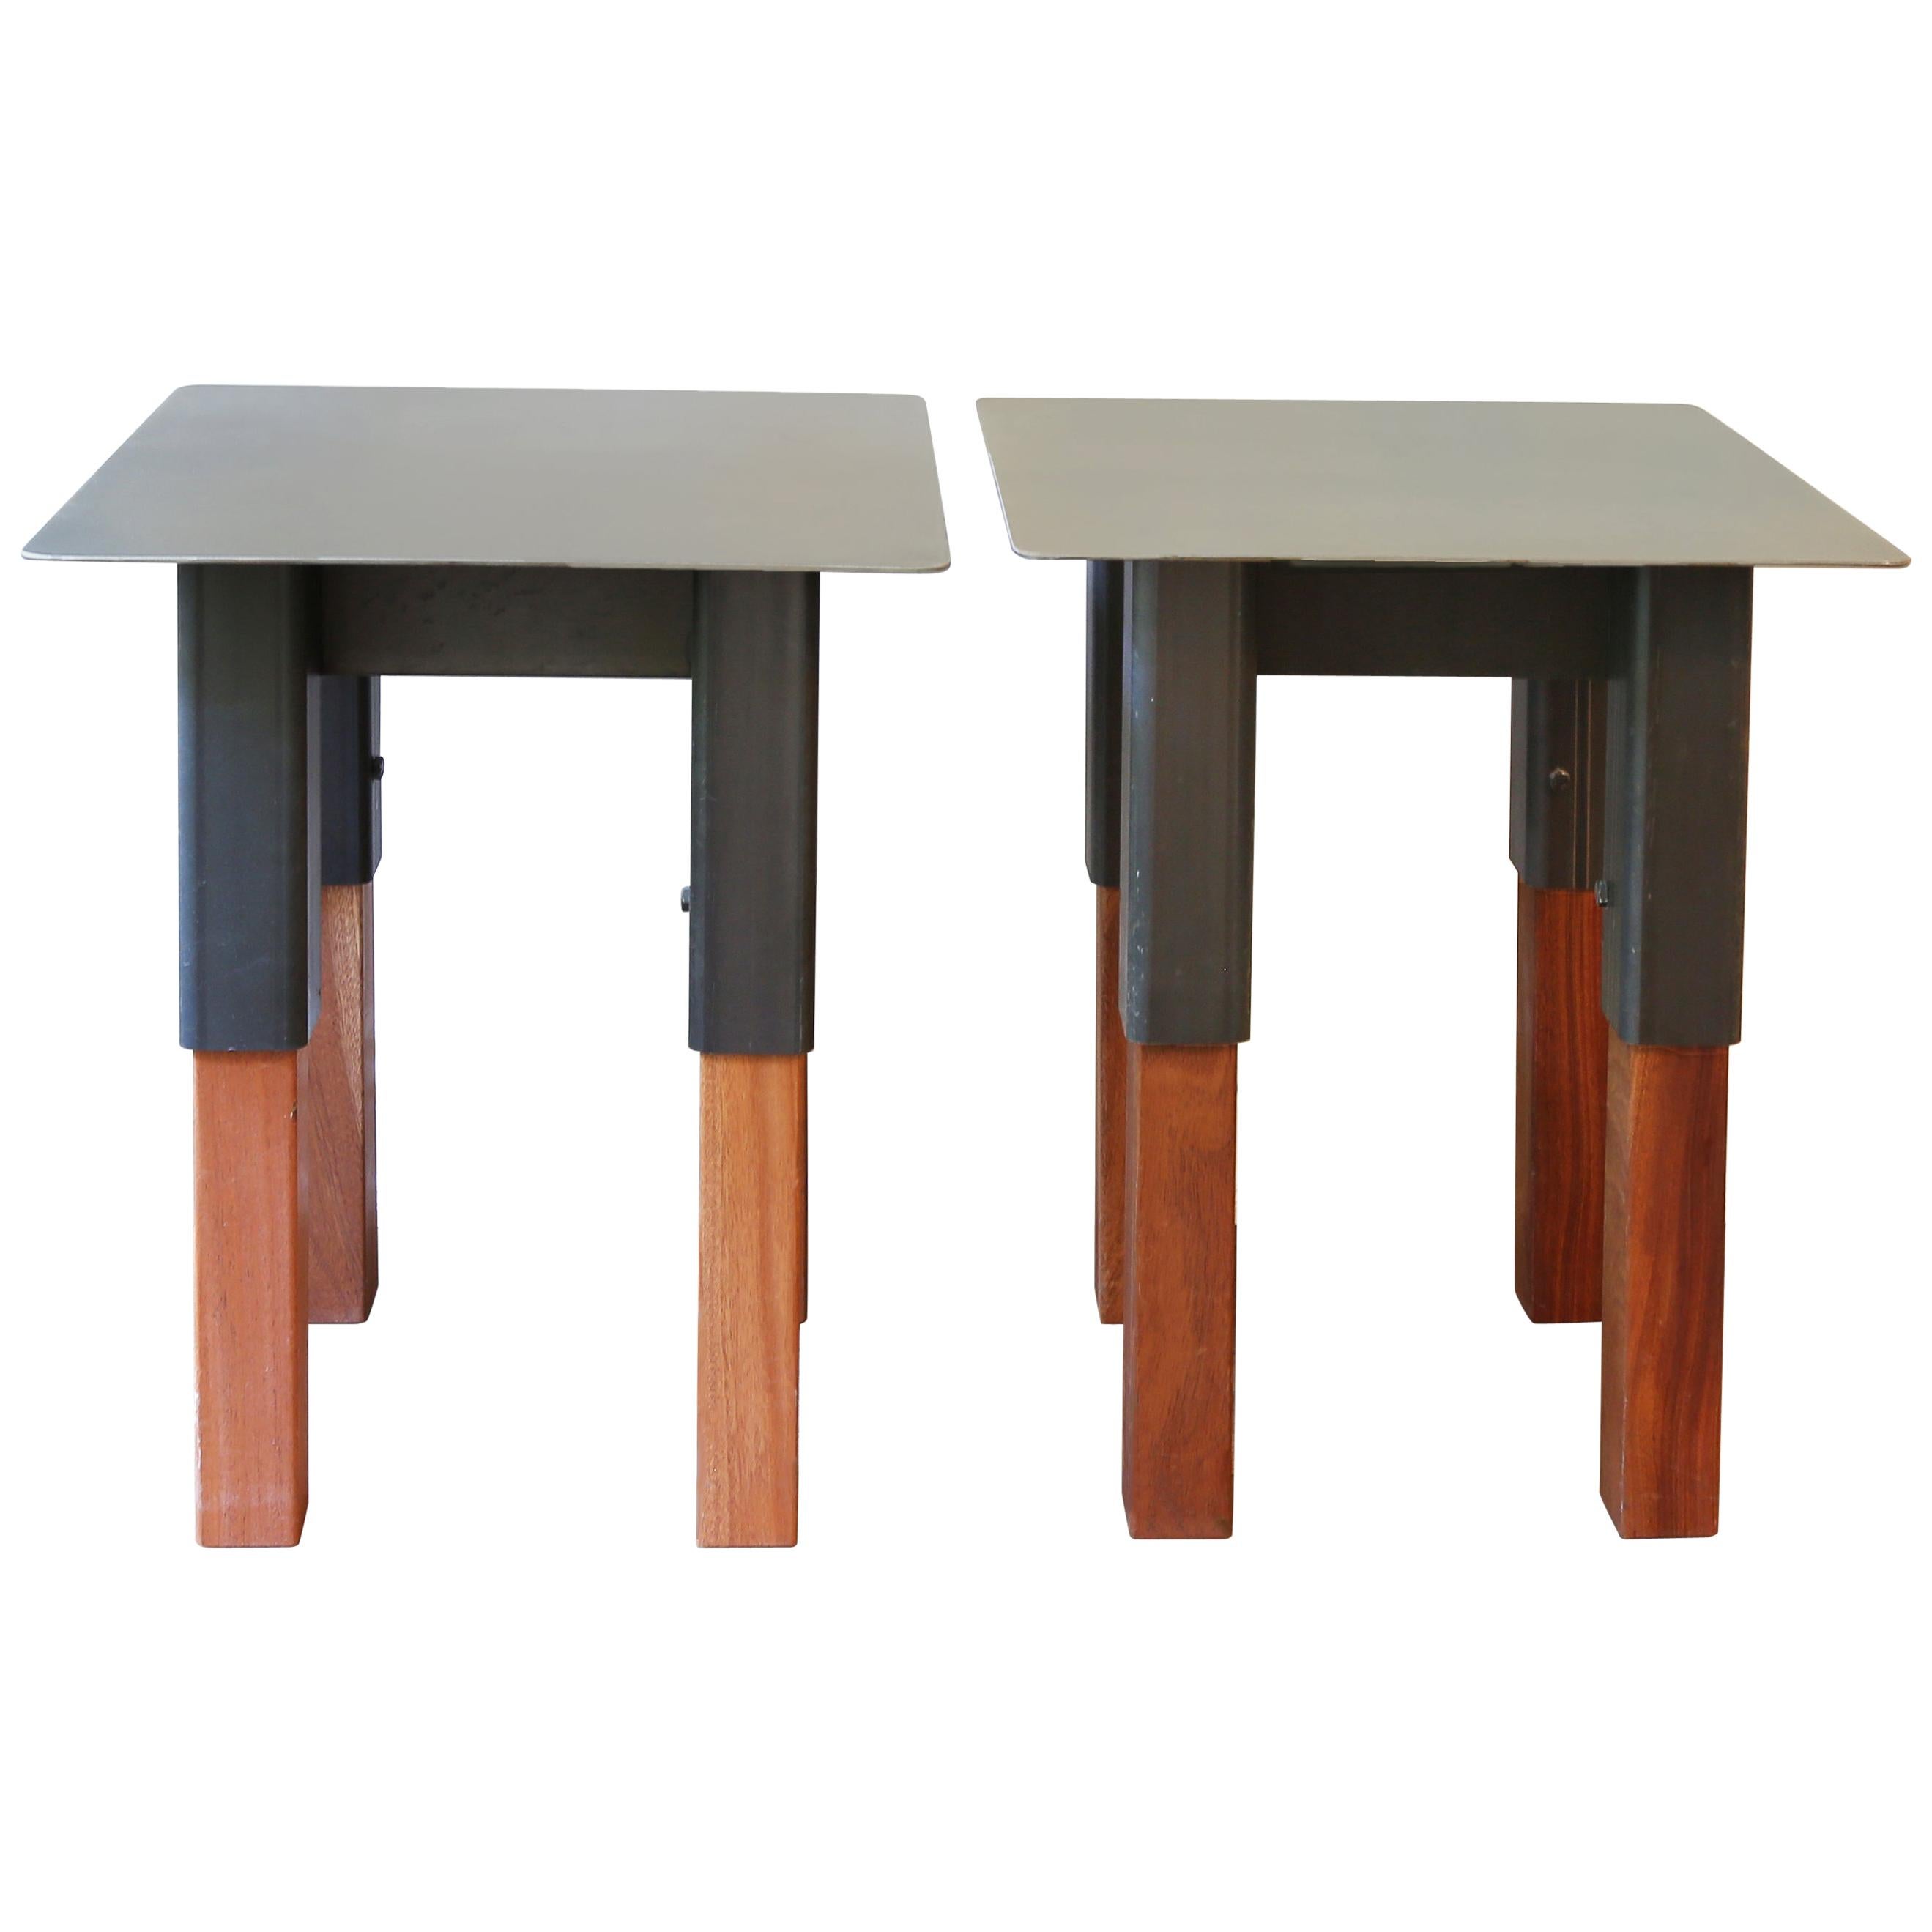 Bodhi Surfer Side Tables / End Tables Steel and Mahogany, Jordan Mozer, USA 2013 For Sale